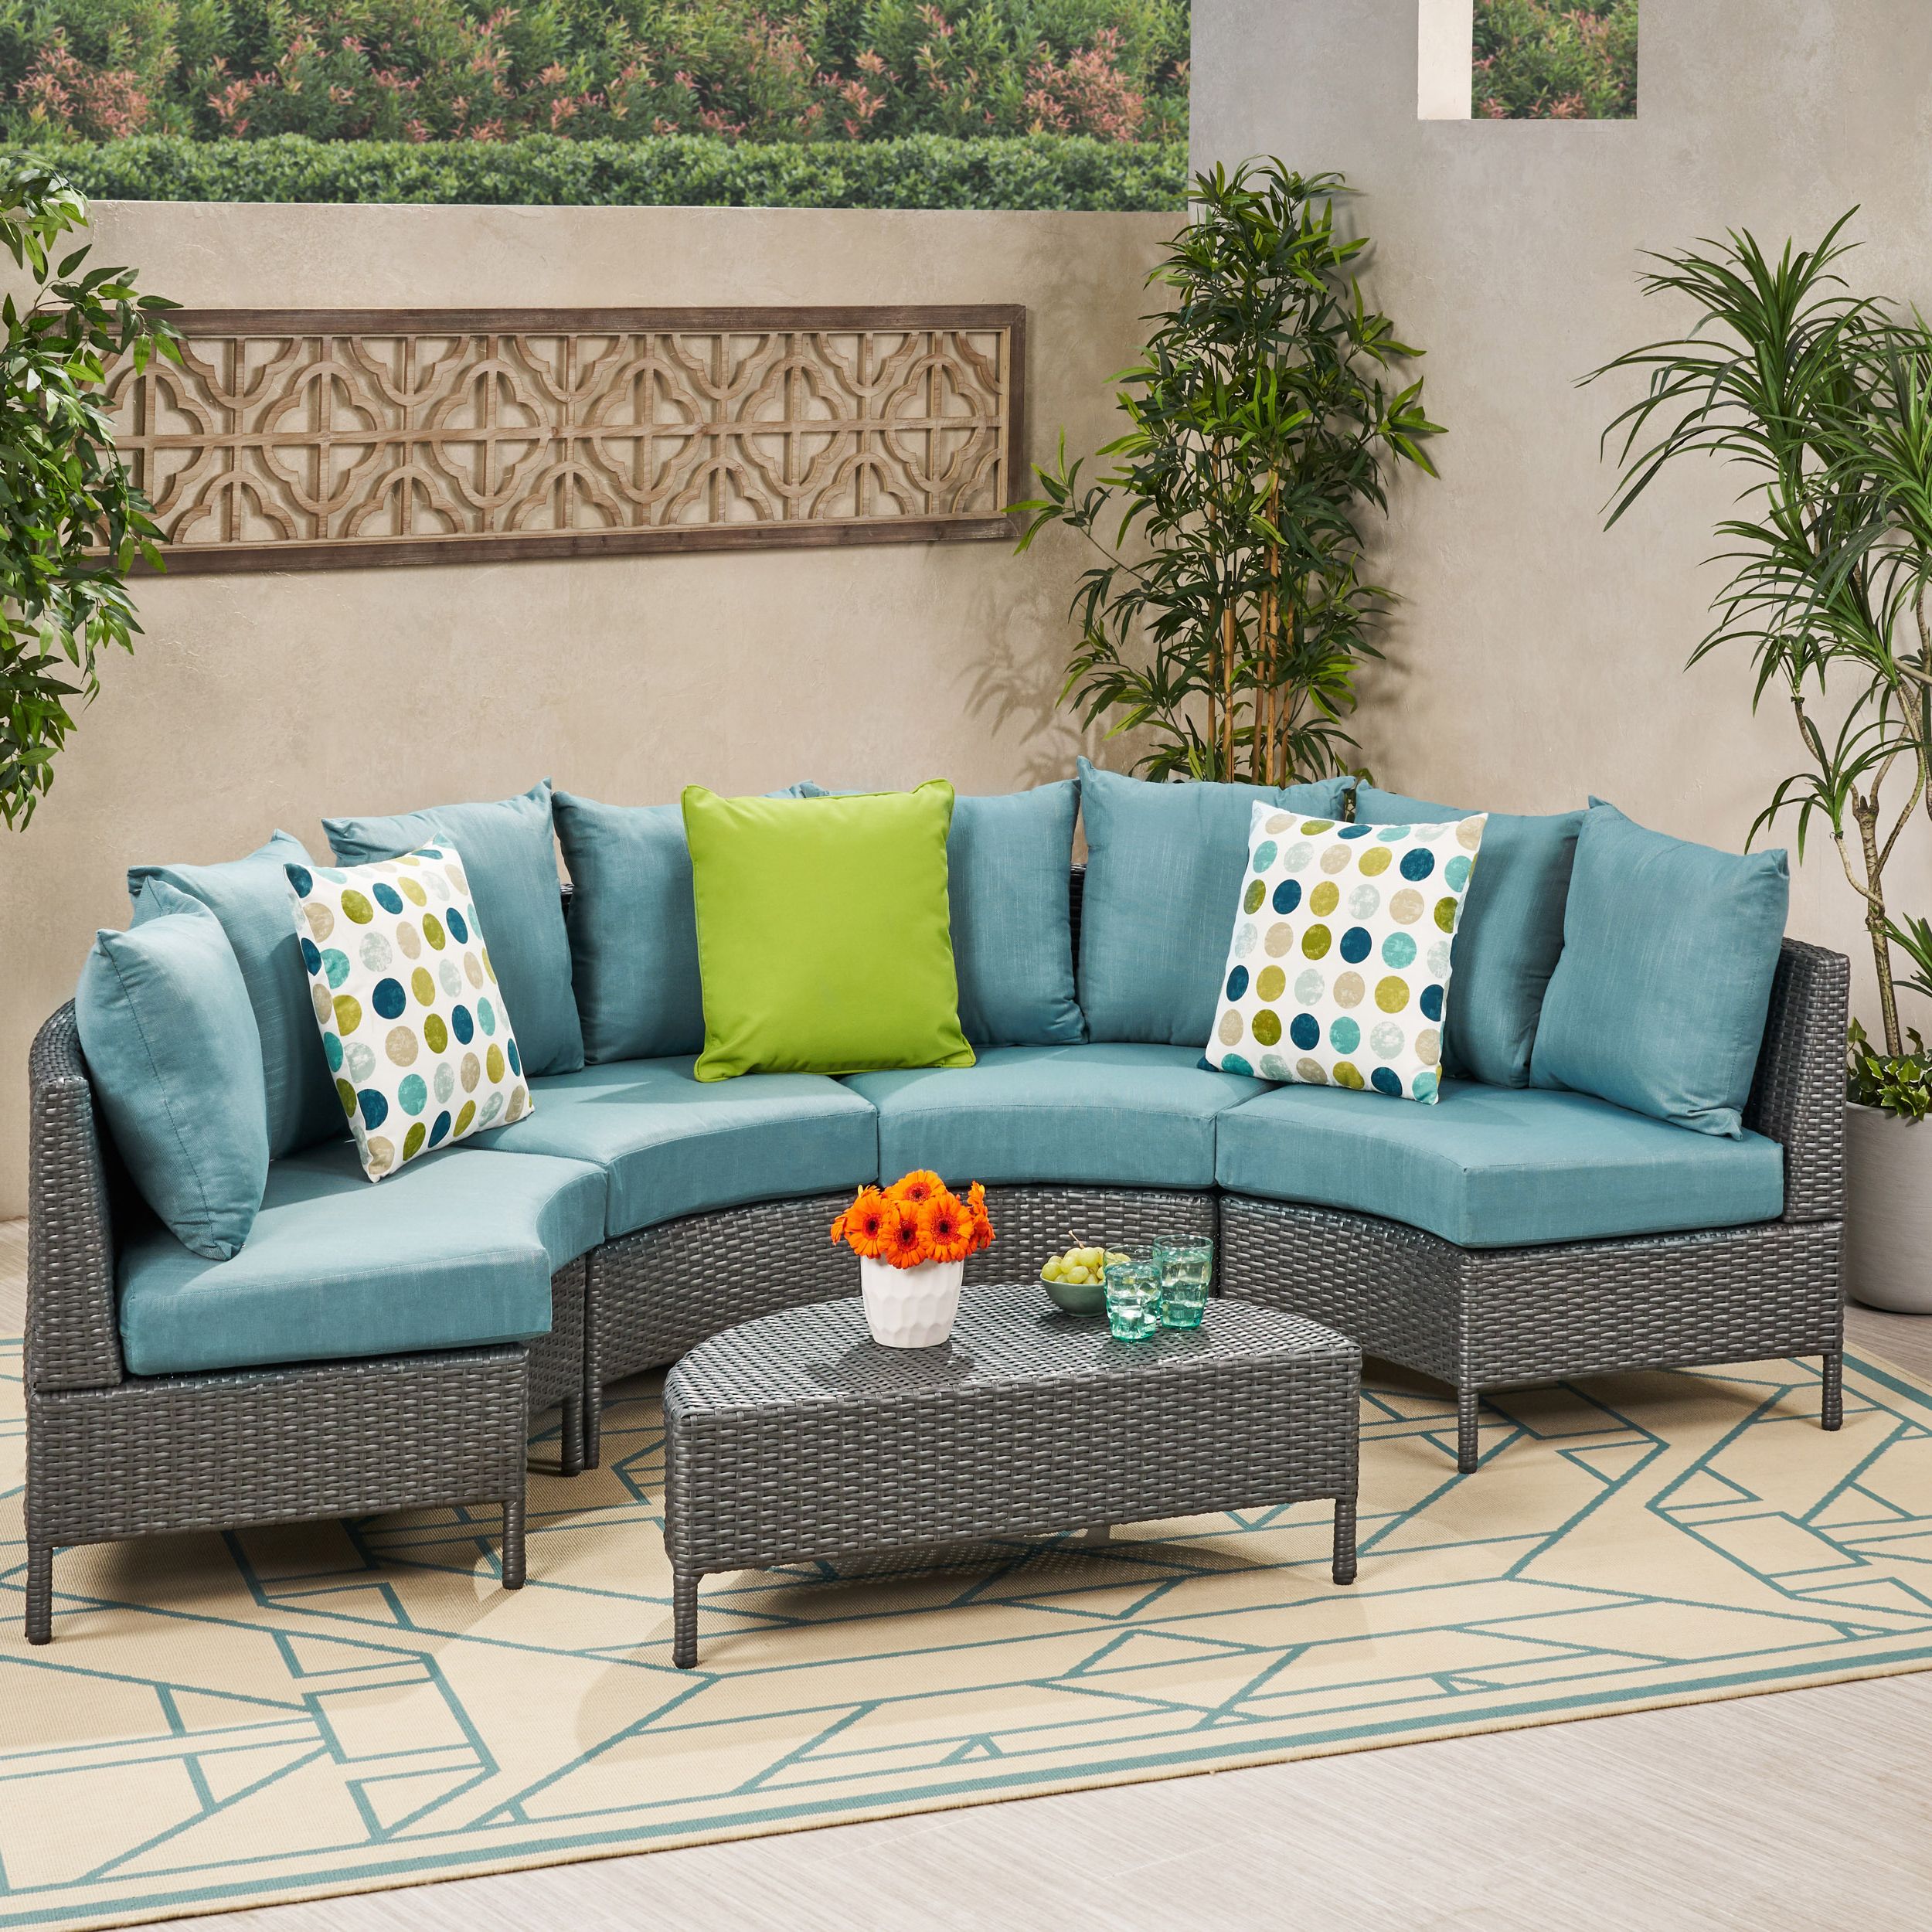 Trendy Hampton Outdoor 8 Seater Wicker Sectional Sofa Set With Cushions, Grey With Outdoor Seating Sectional Patio Sets (View 8 of 15)